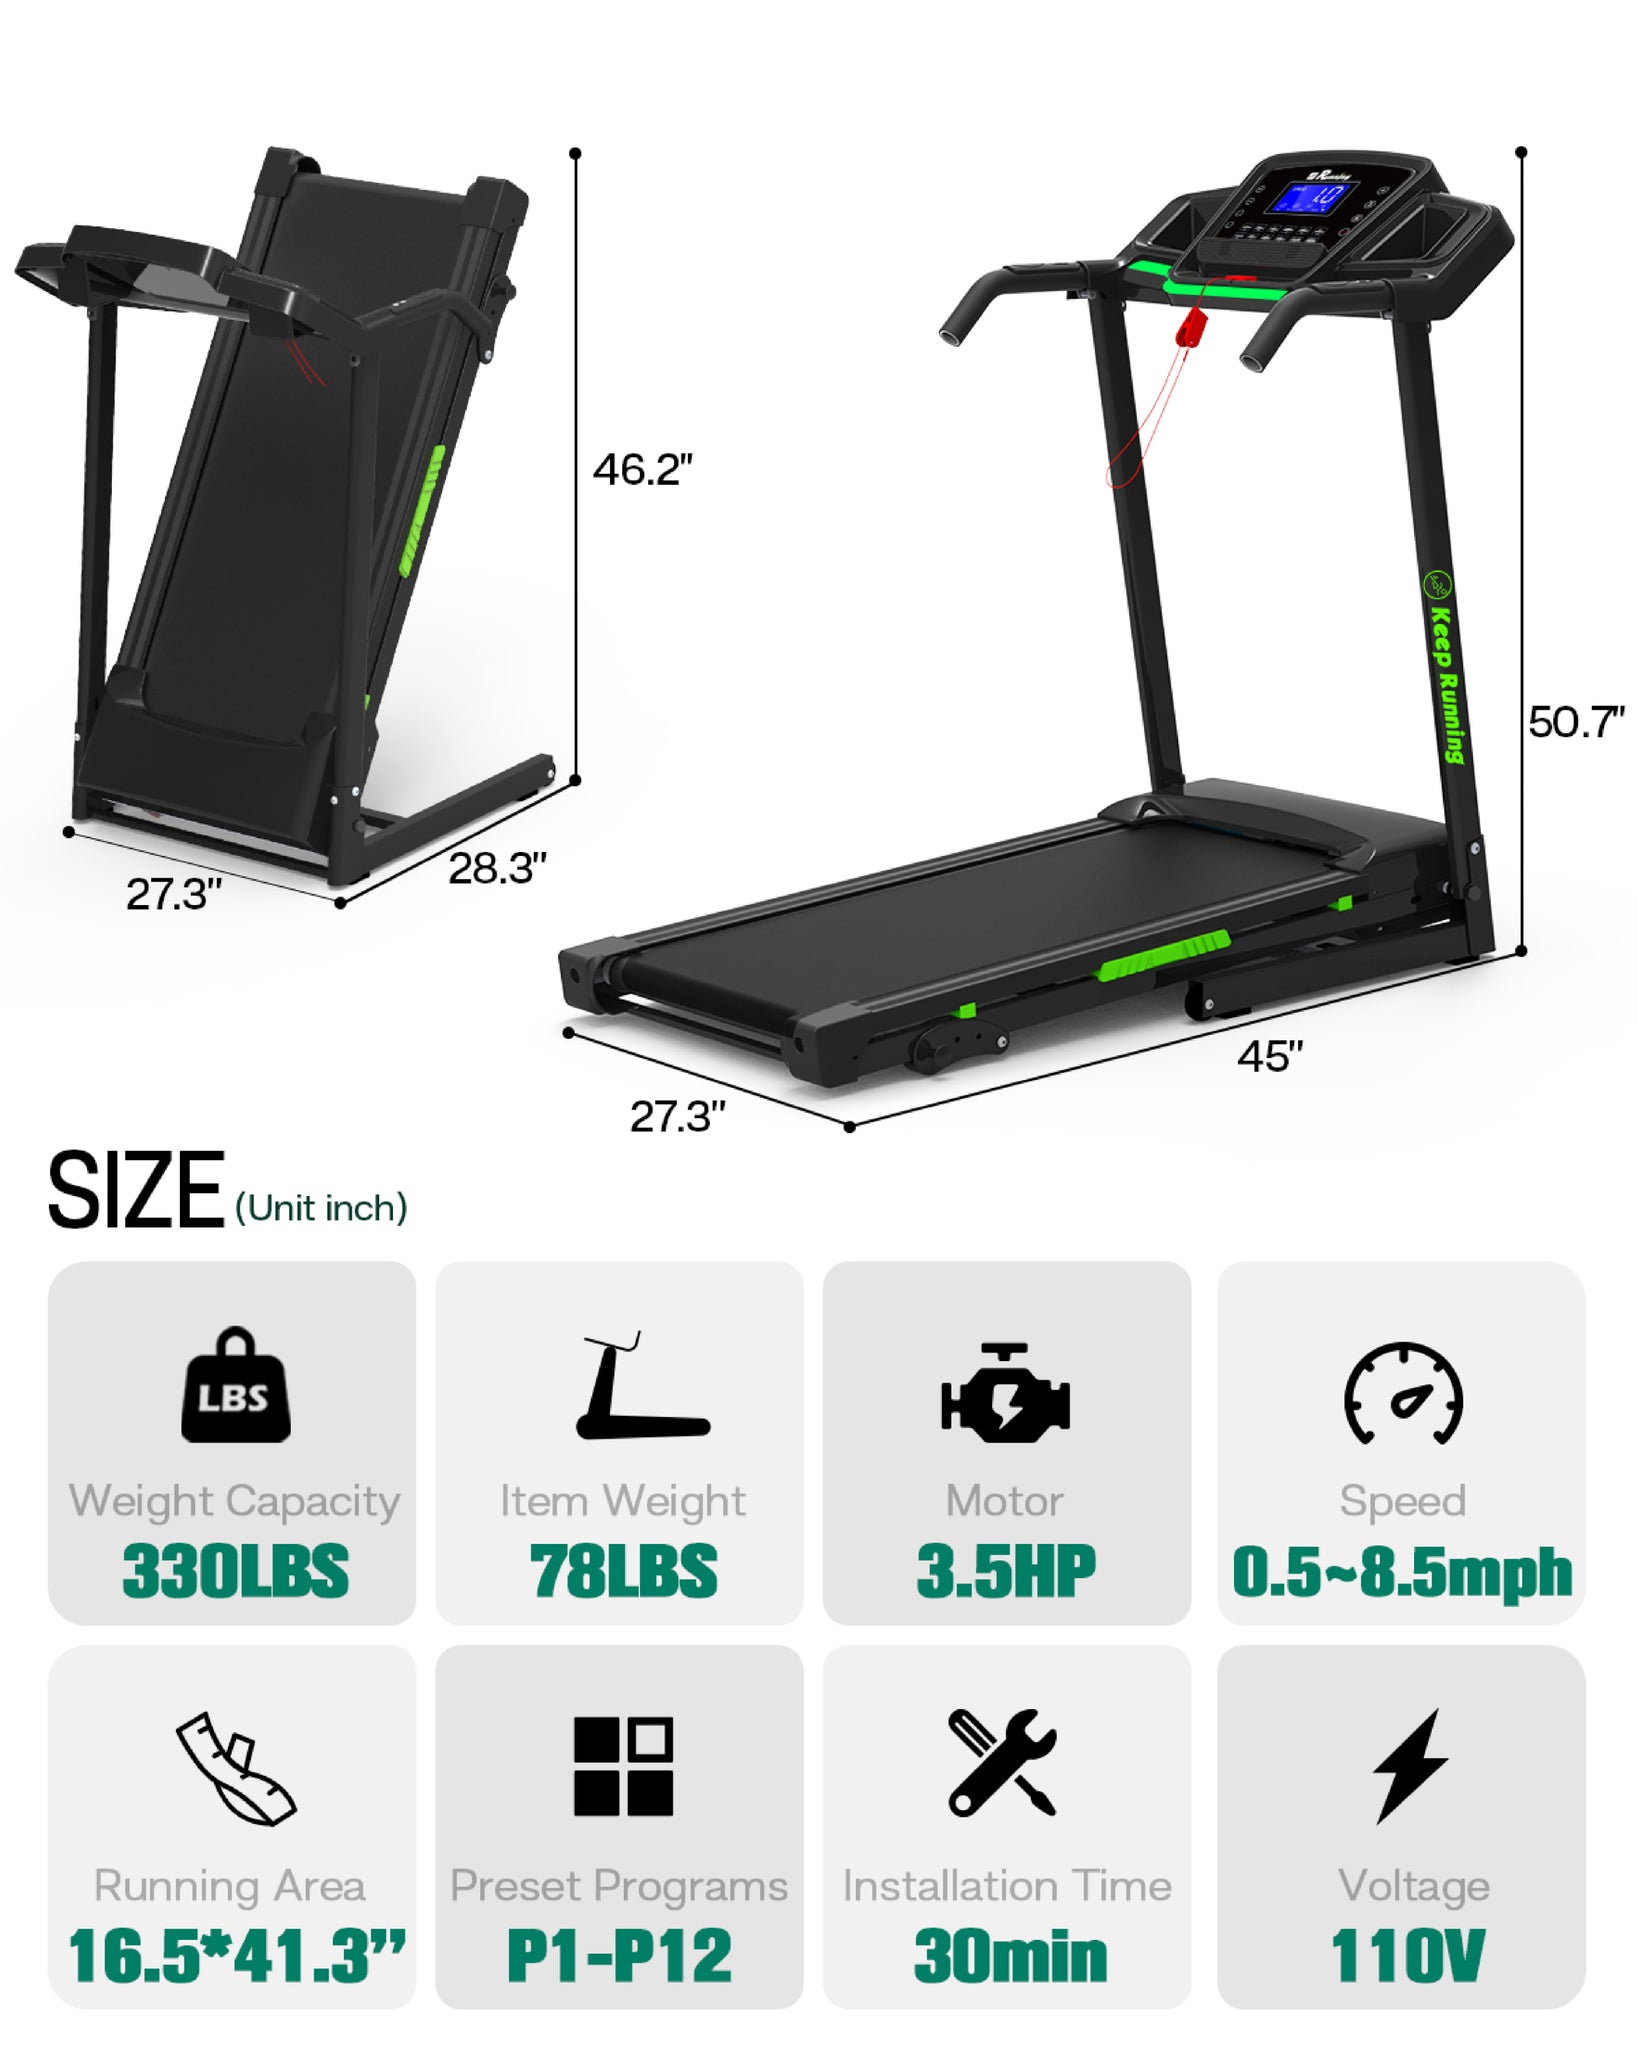 Foldable Treadmill with Incline, Folding Treadmill for black-stainless steel